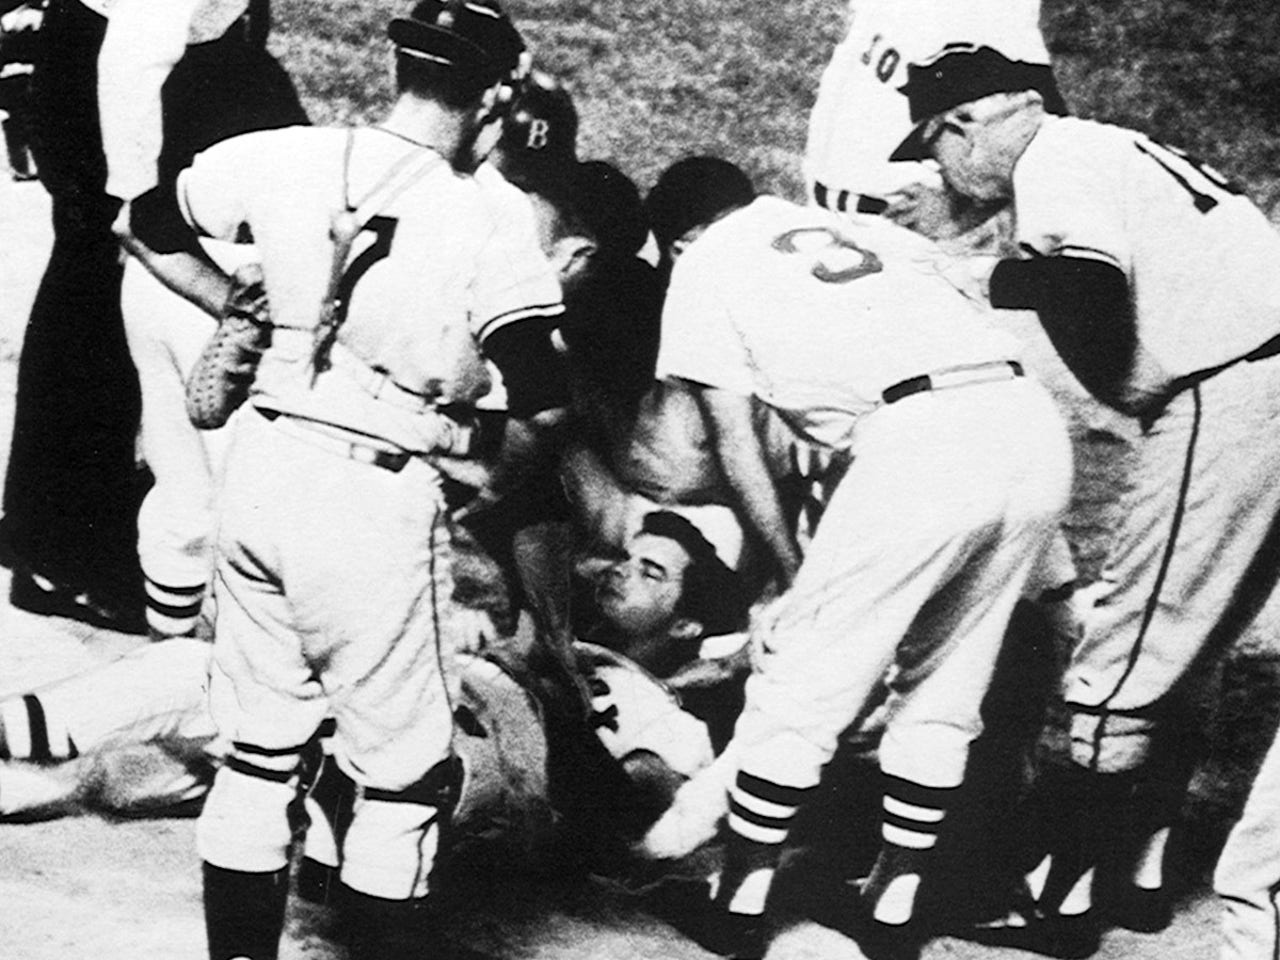 Flashback: Red Sox's Conigliaro tragically hit in face by fastball